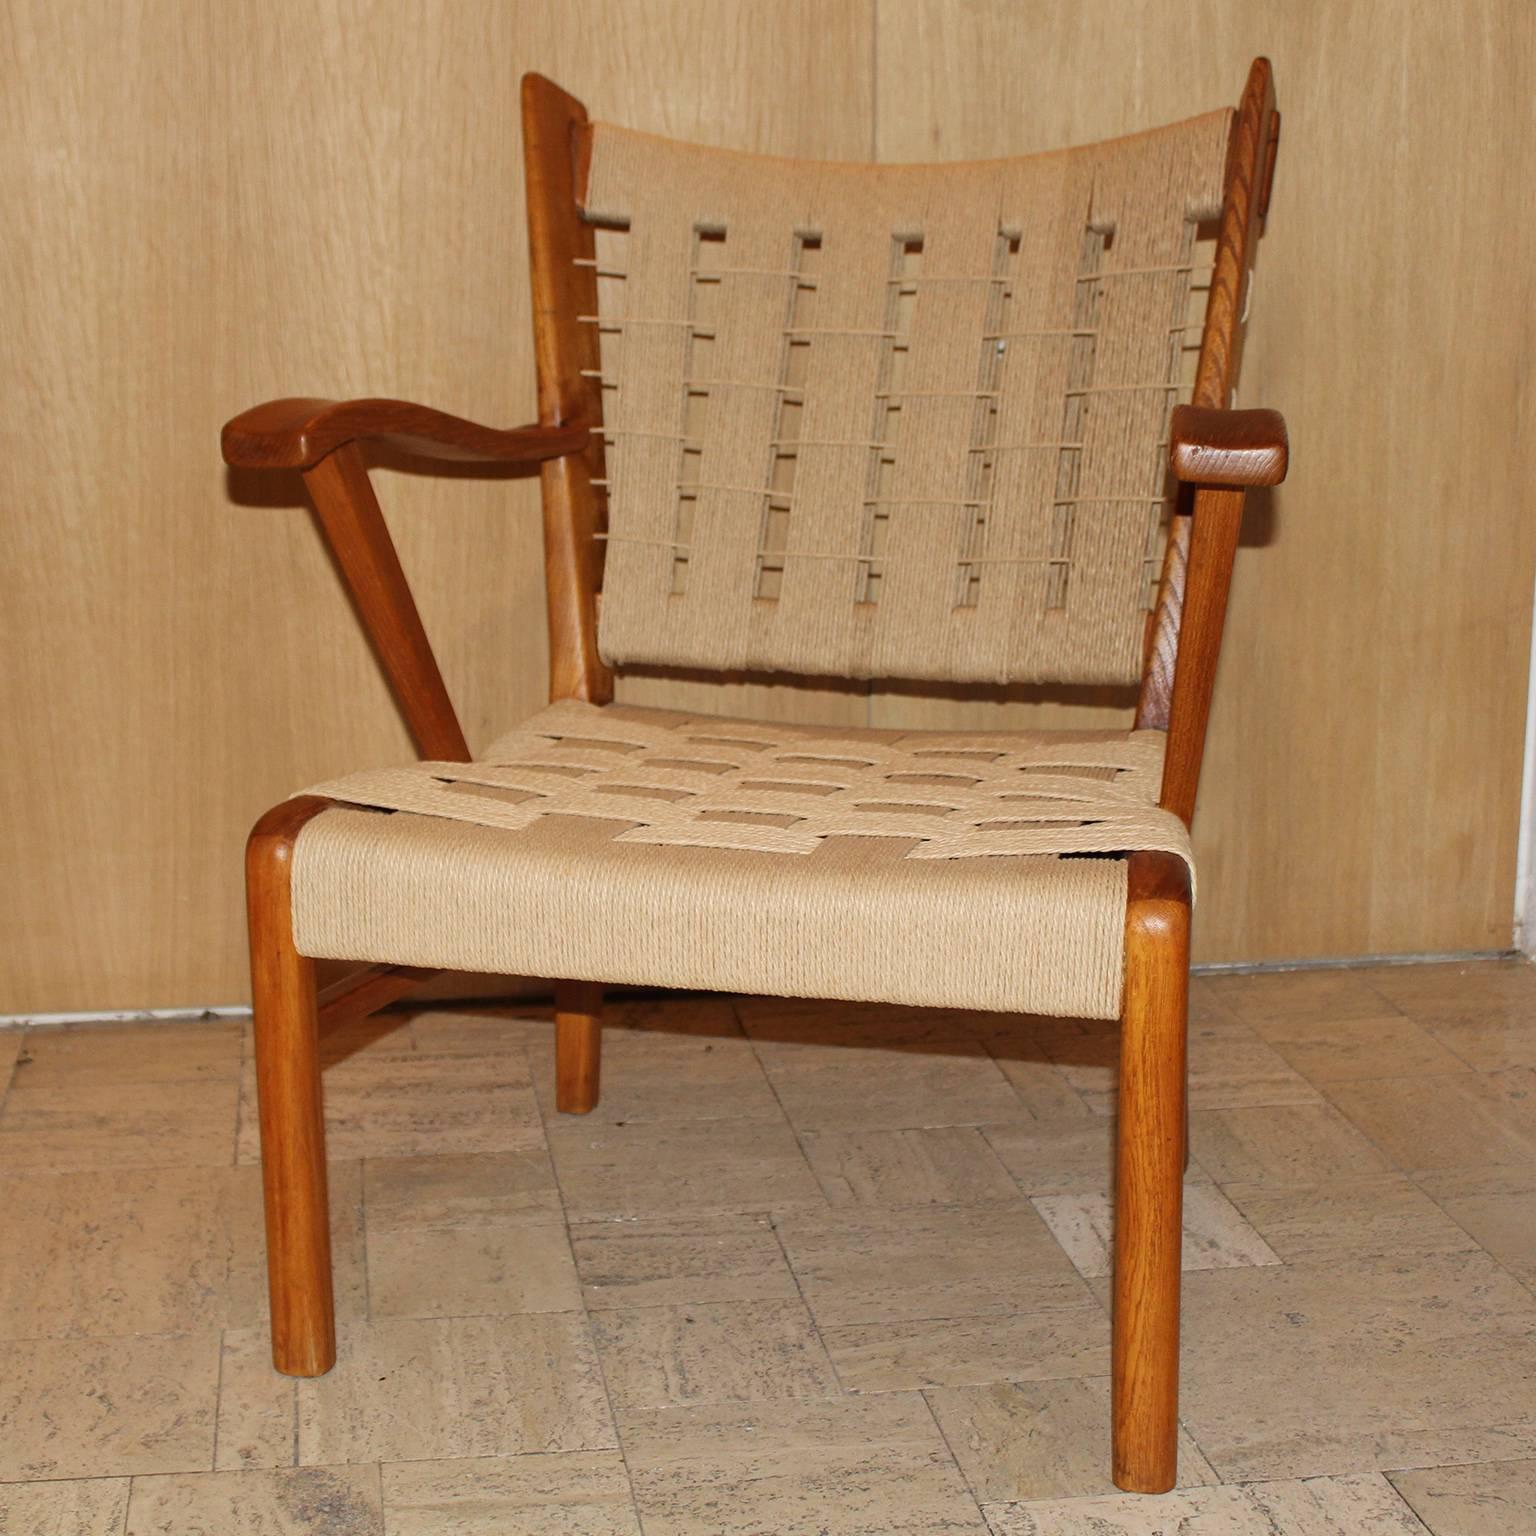 Pair of armchairs with seats and back rest in woven.